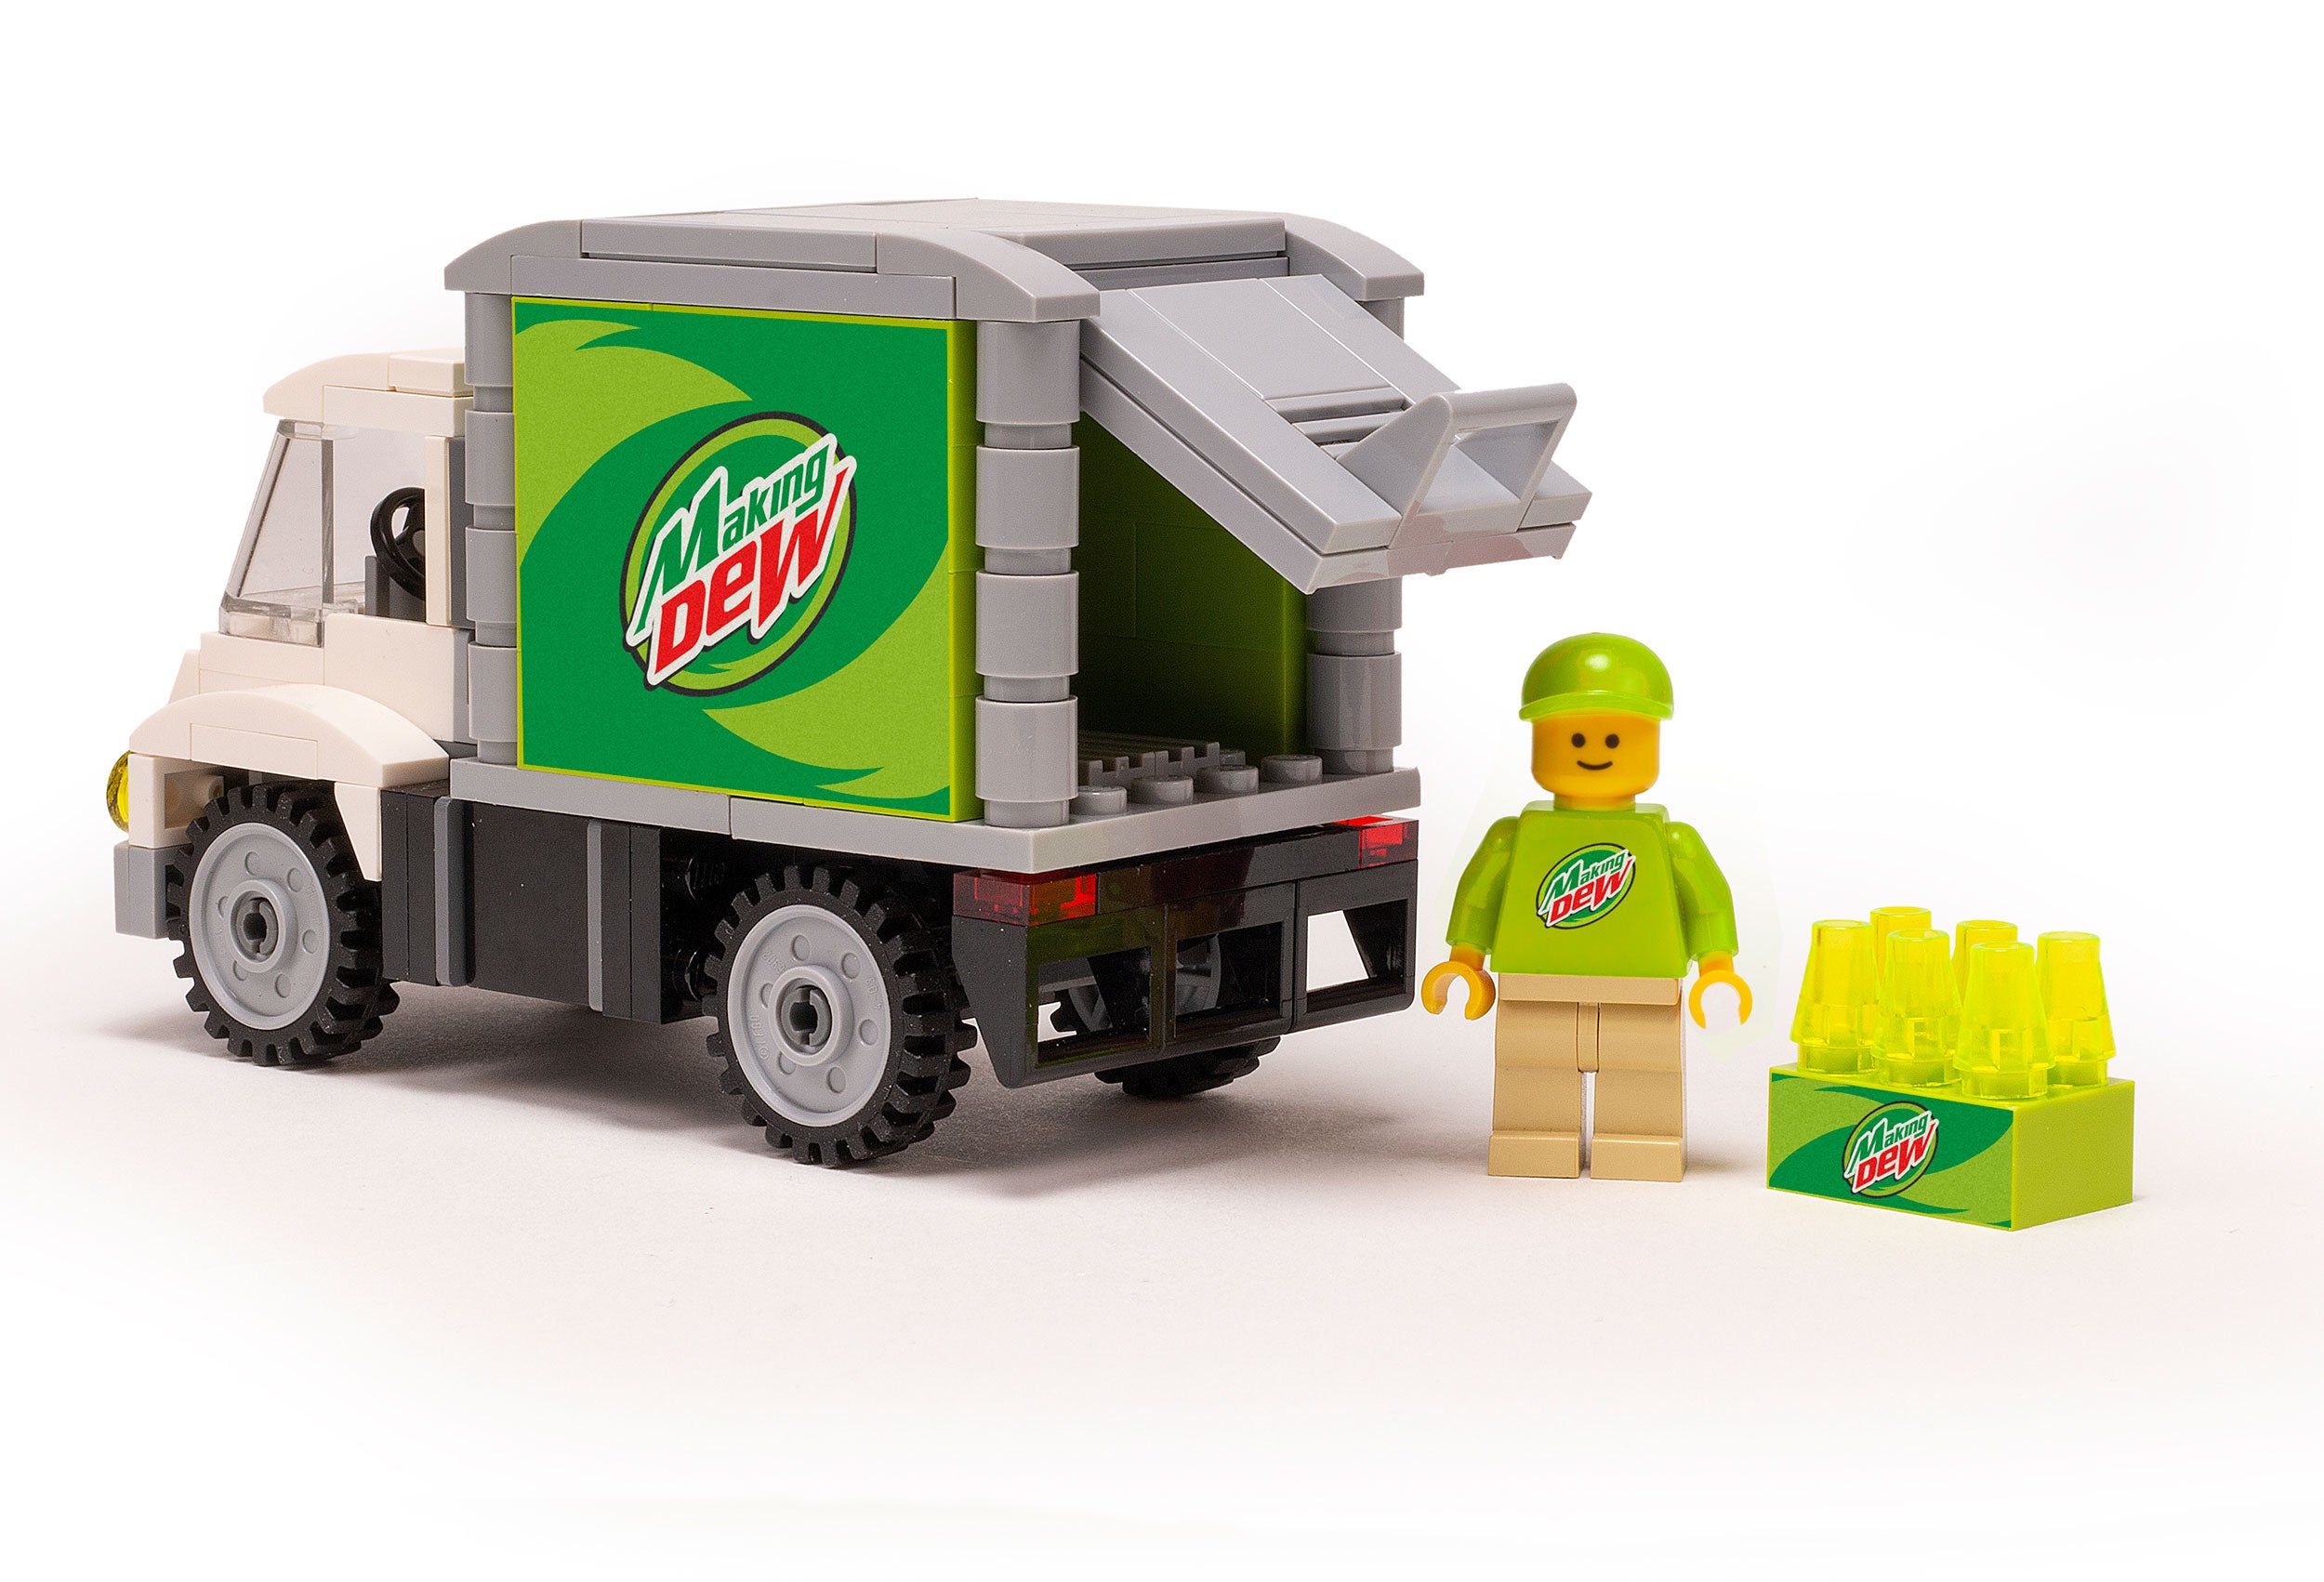 B3 Customs Making Dew Soda Delivery Truck with Minifigure